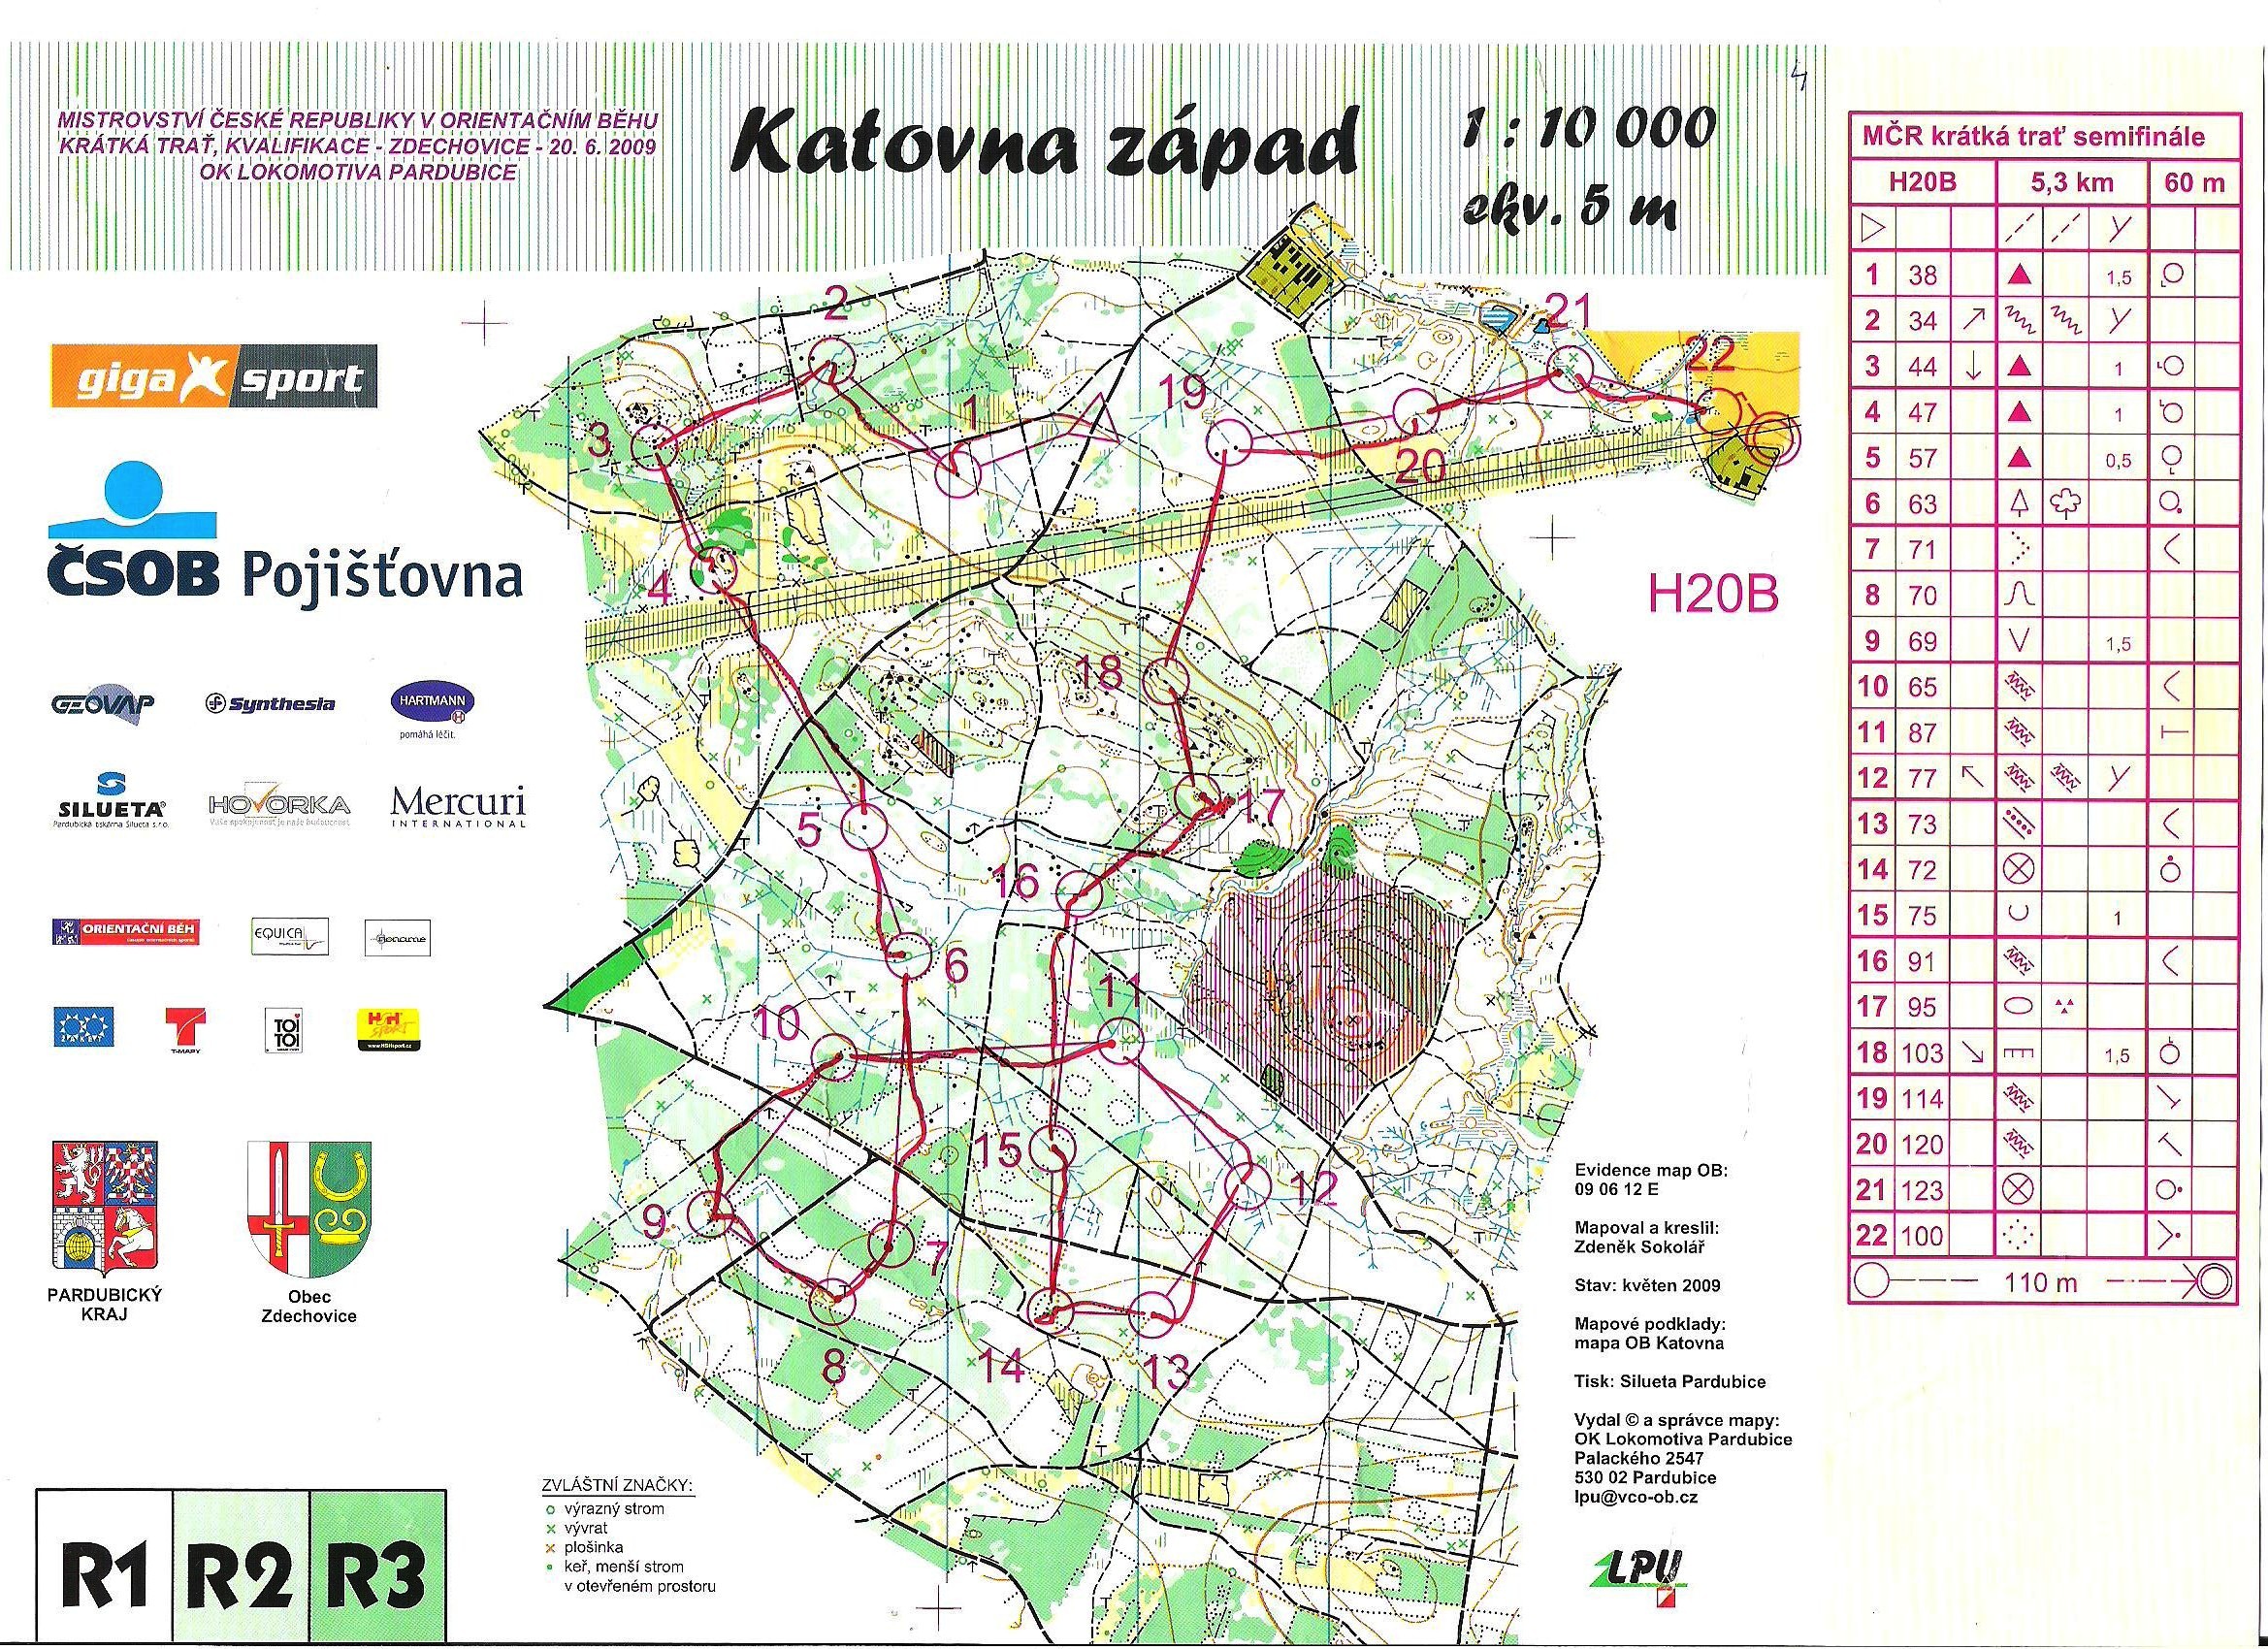 Czech middle championships 2009 - qualification (2009-06-20)